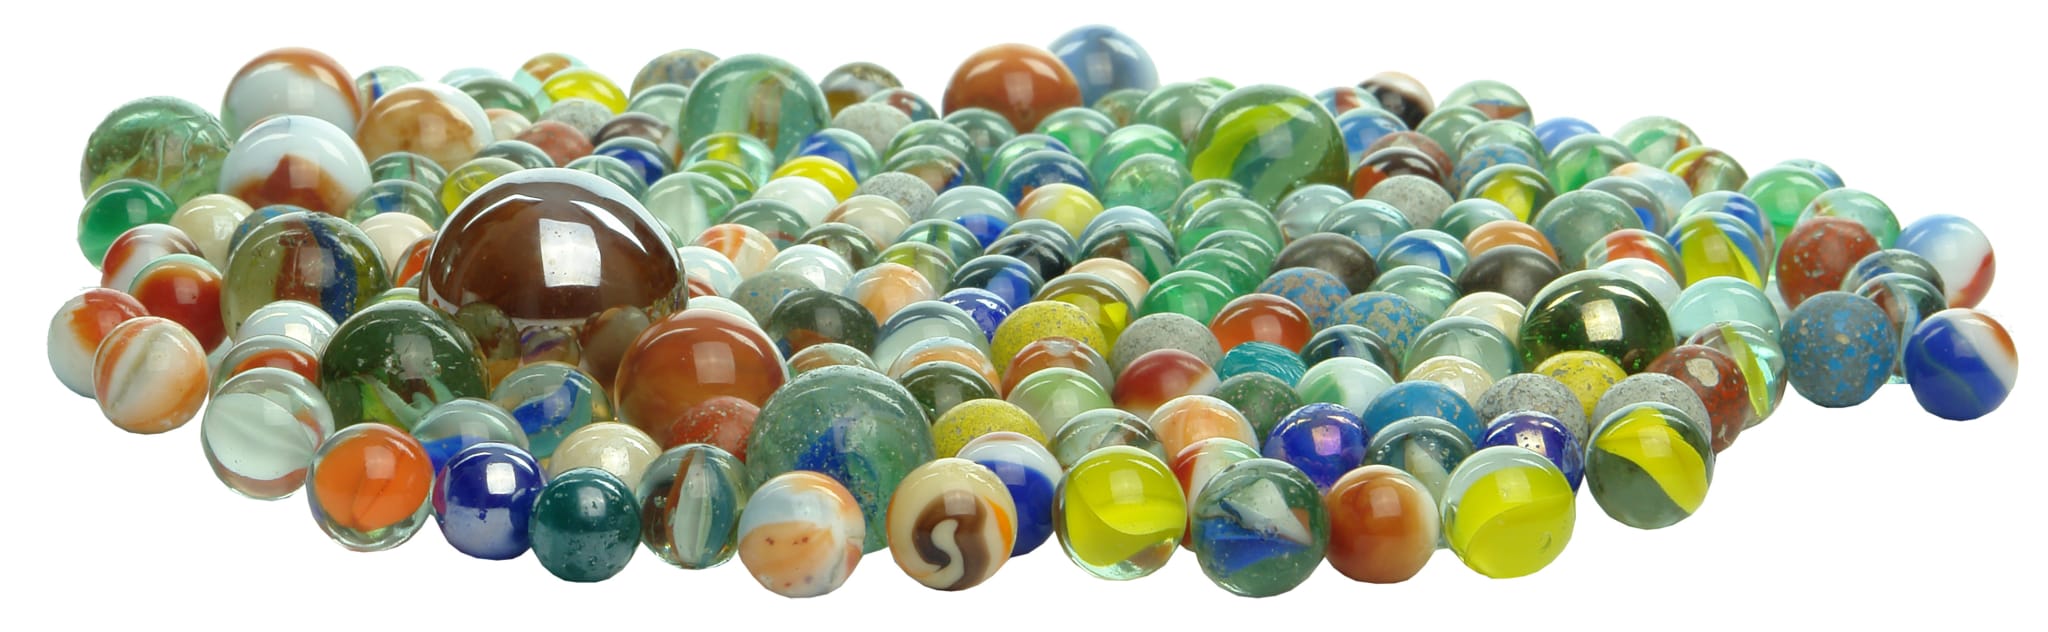 Old and Antique Marbles